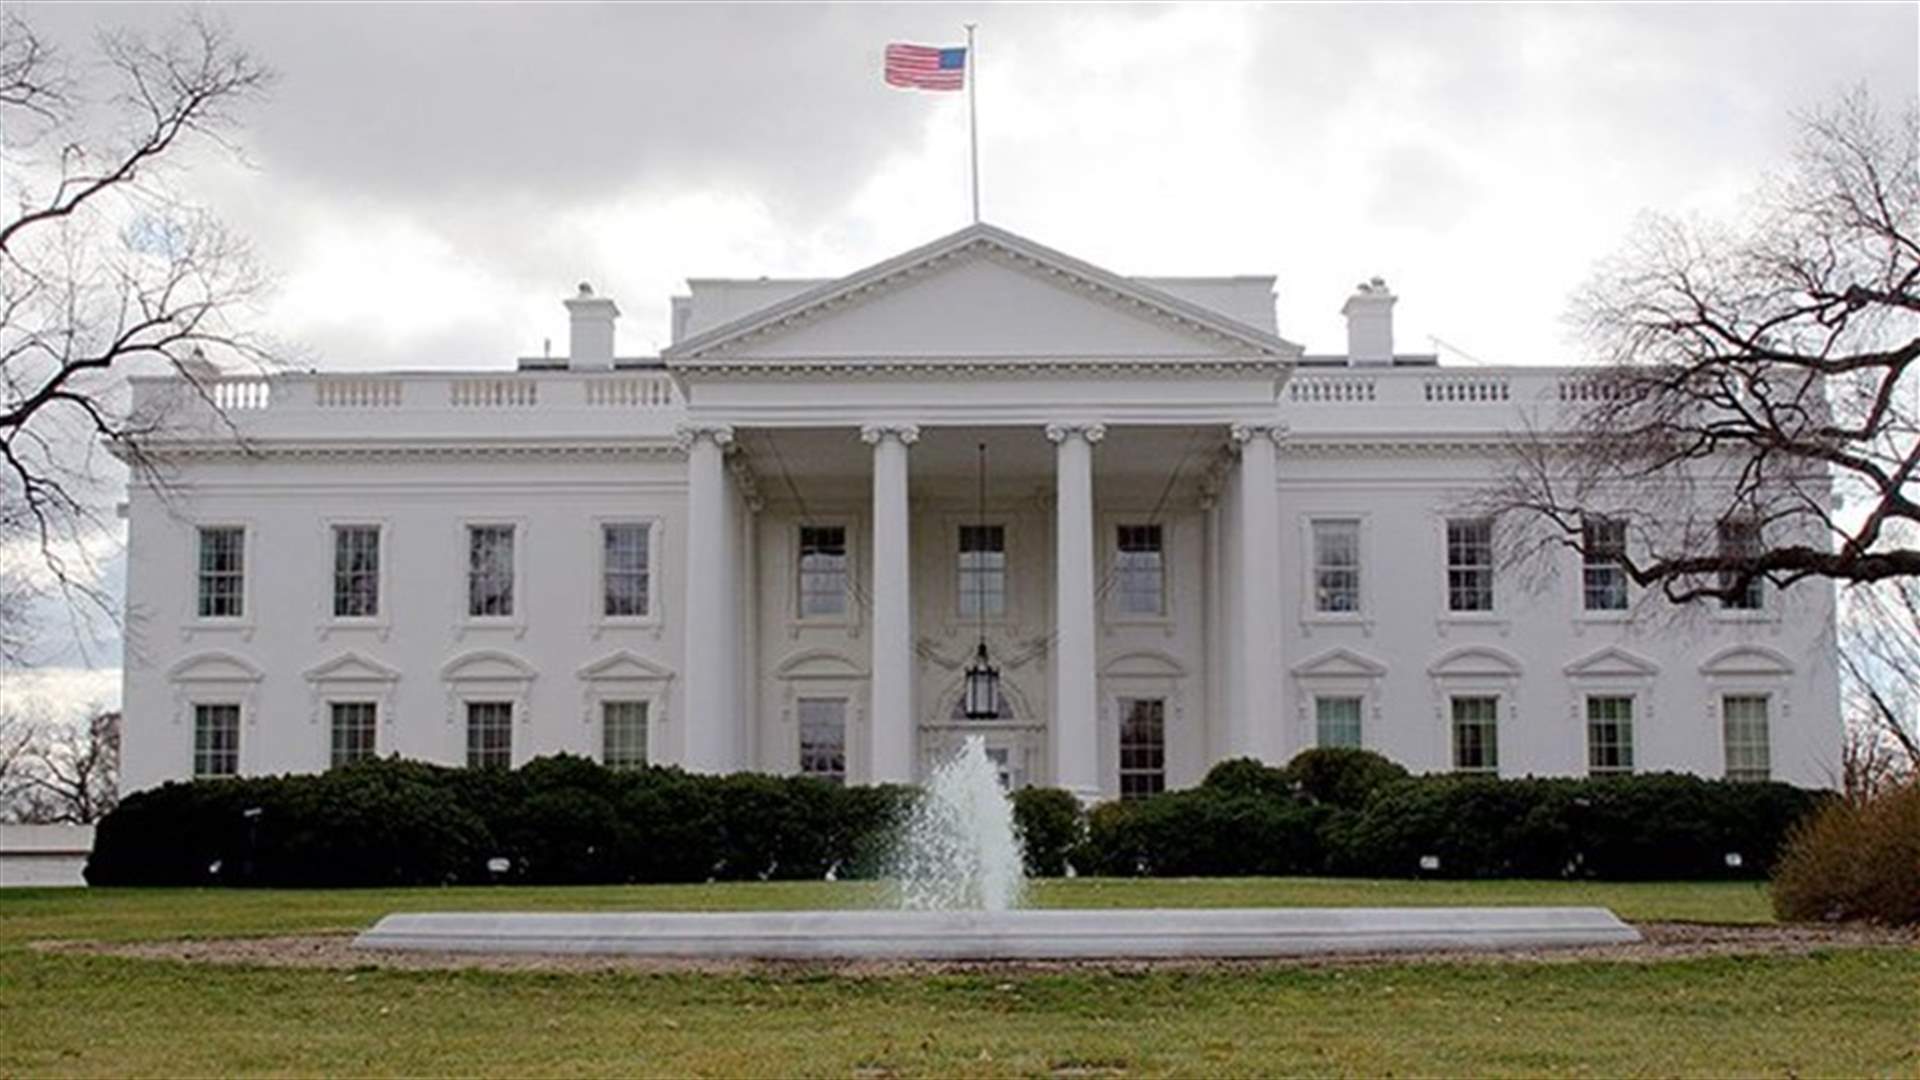 Intruder Arrested On White House Grounds, CNN Reports